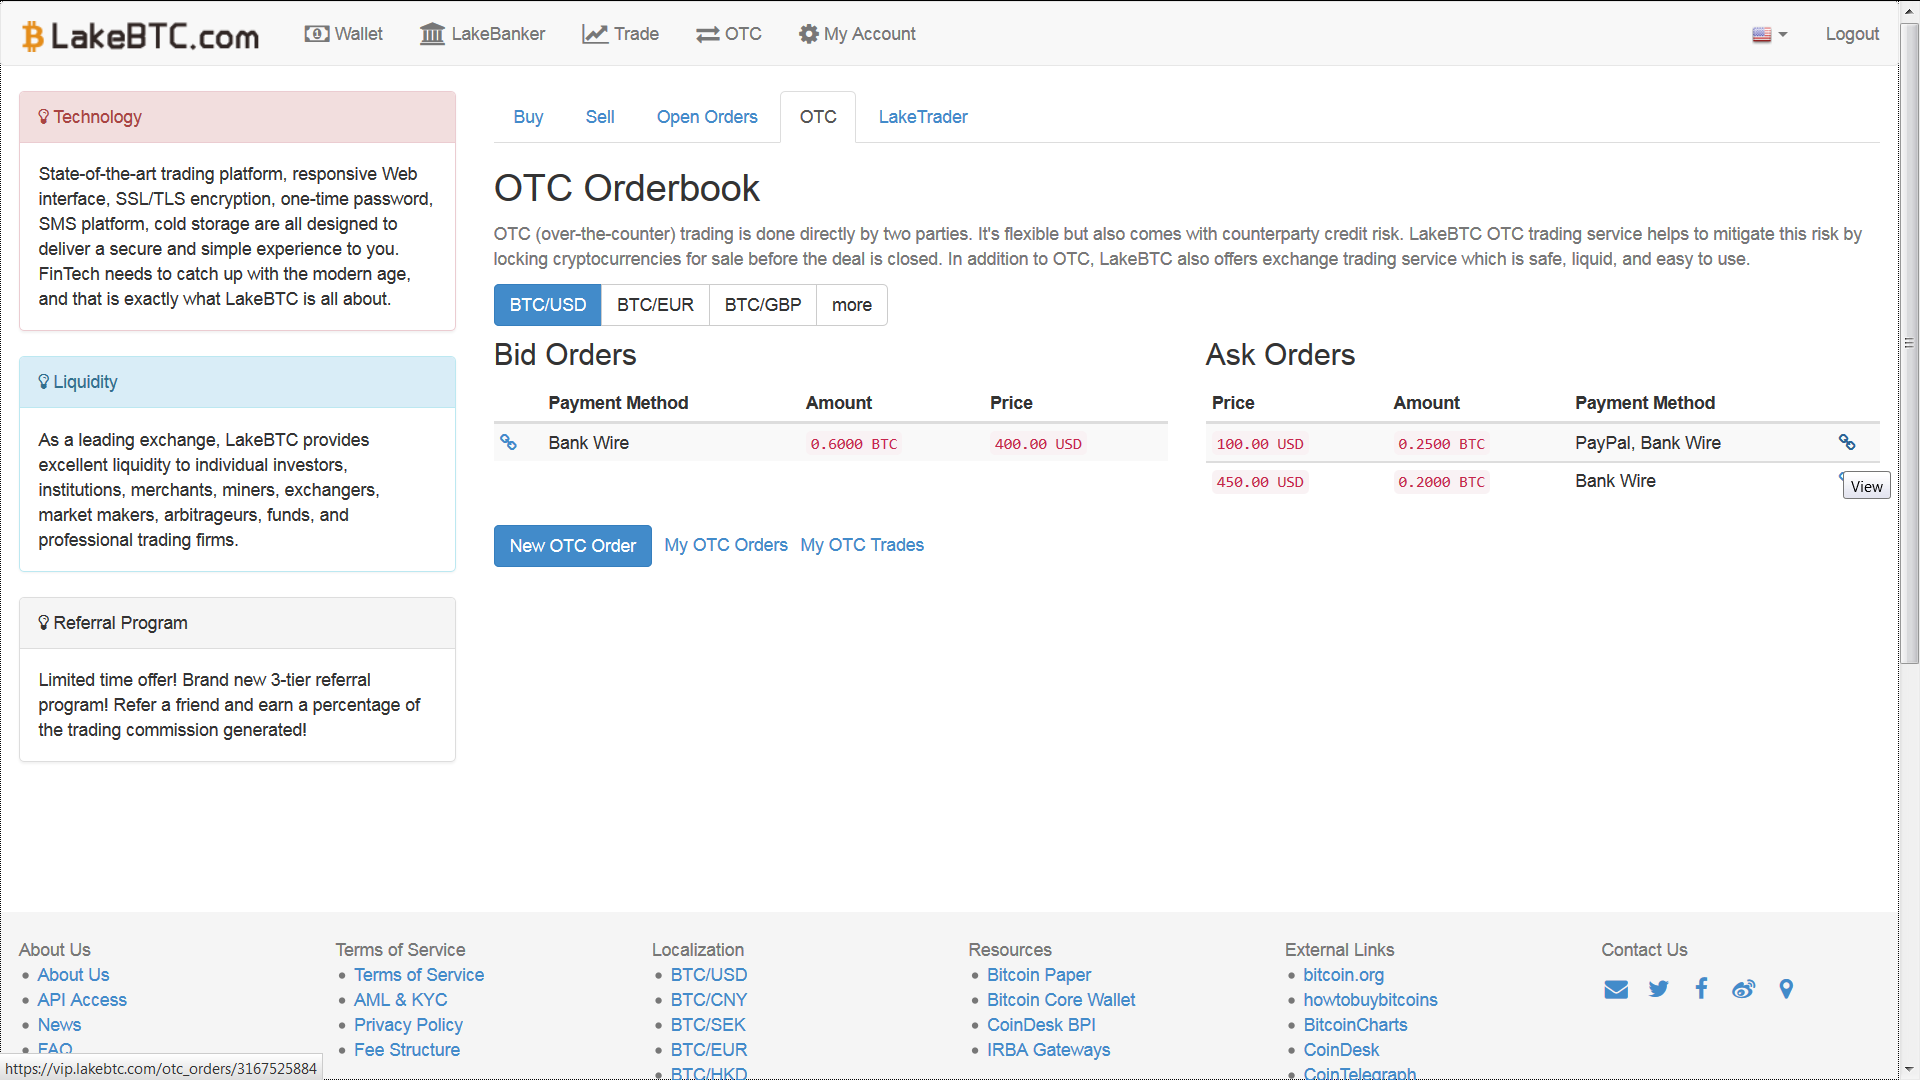 LakeBTC launches OTC feature; CoinReport tests it